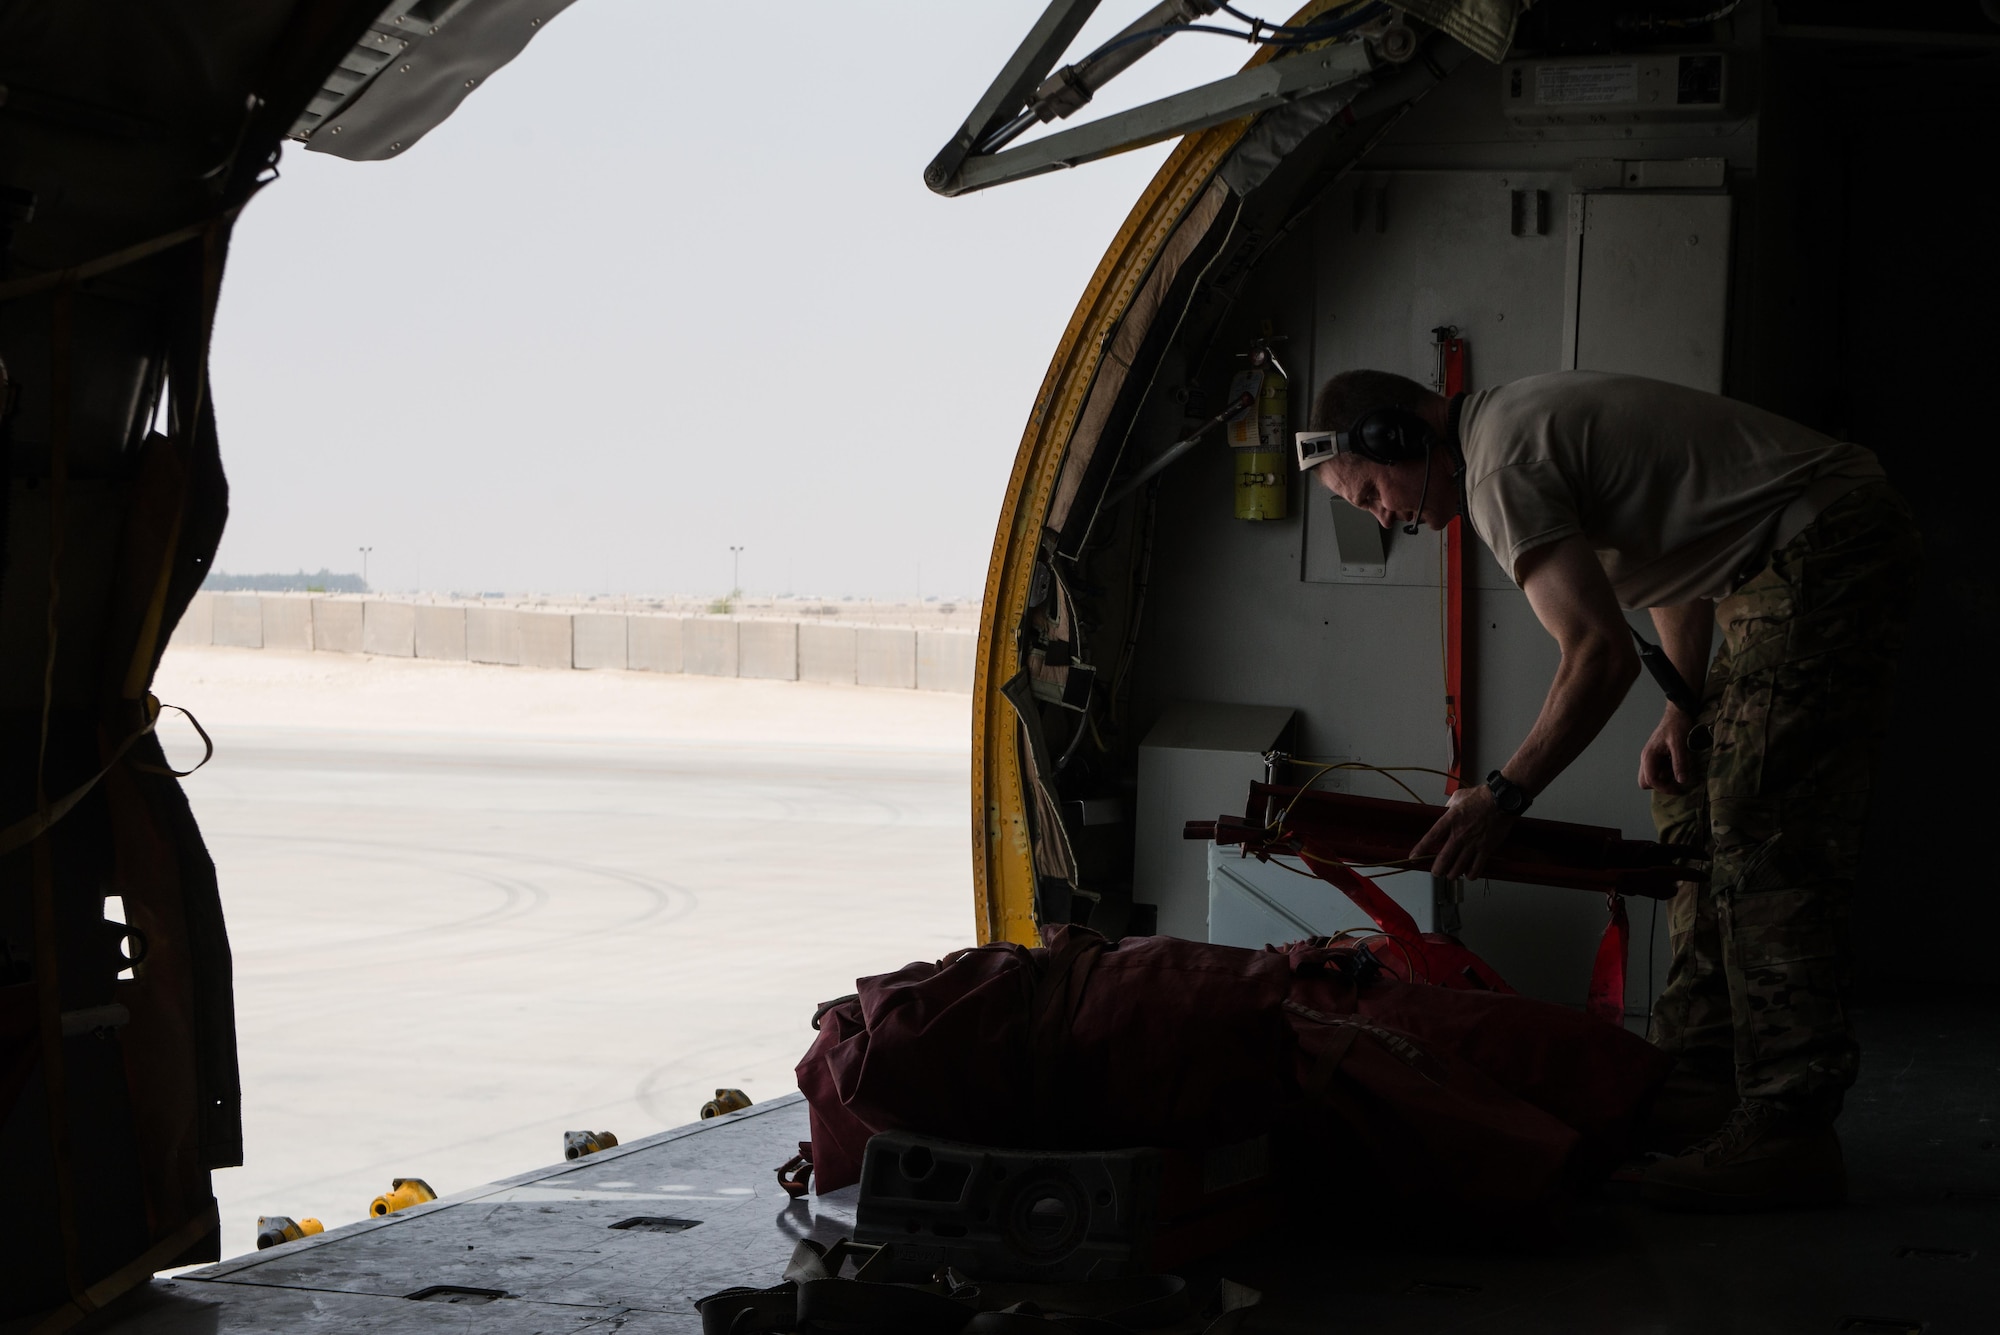 Senior Master Sgt.  Barry, 340th Expeditionary Air Refueling Squadron boom operator, stacks a ladder used to enter the aircraft as he completes his checklist prior to takeoff September 16, 2015 at Al Udeid Air Base, Qatar. (U.S. Air Force photo/Staff Sgt. Alexandre Montes)